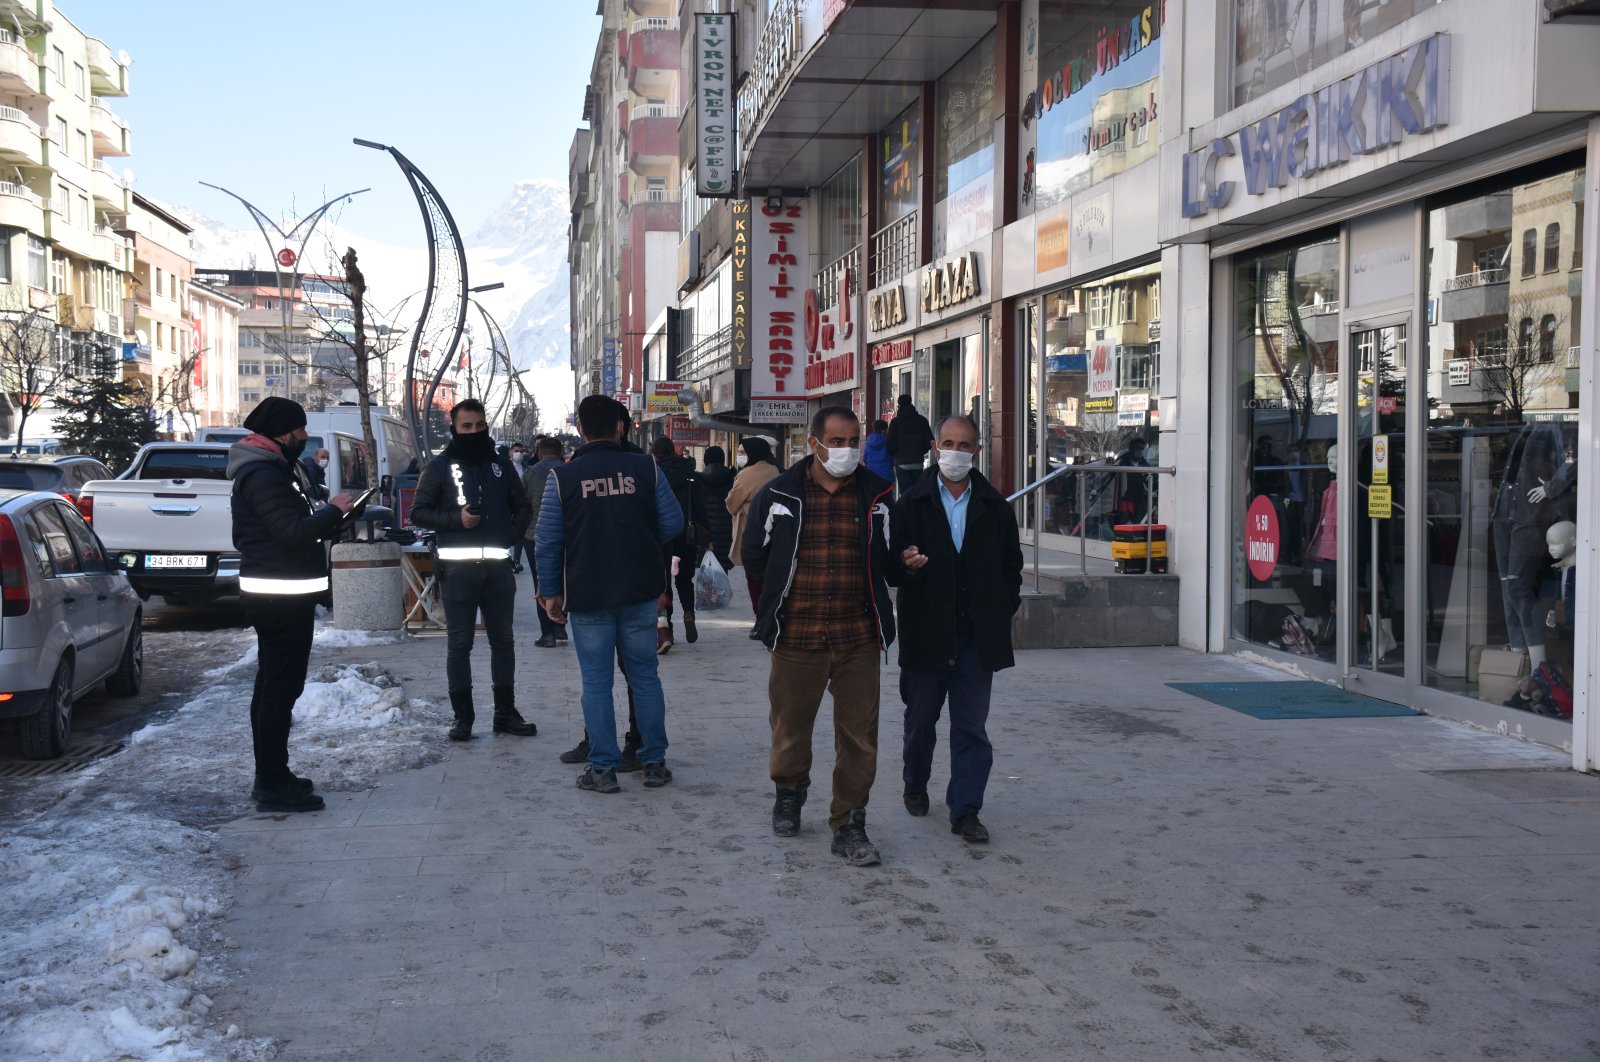 People wearing protective masks walk past police officers enforcing rules against the pandemic, in Hakkari, southeastern Turkey, Feb. 24, 2021. (AA Photo)